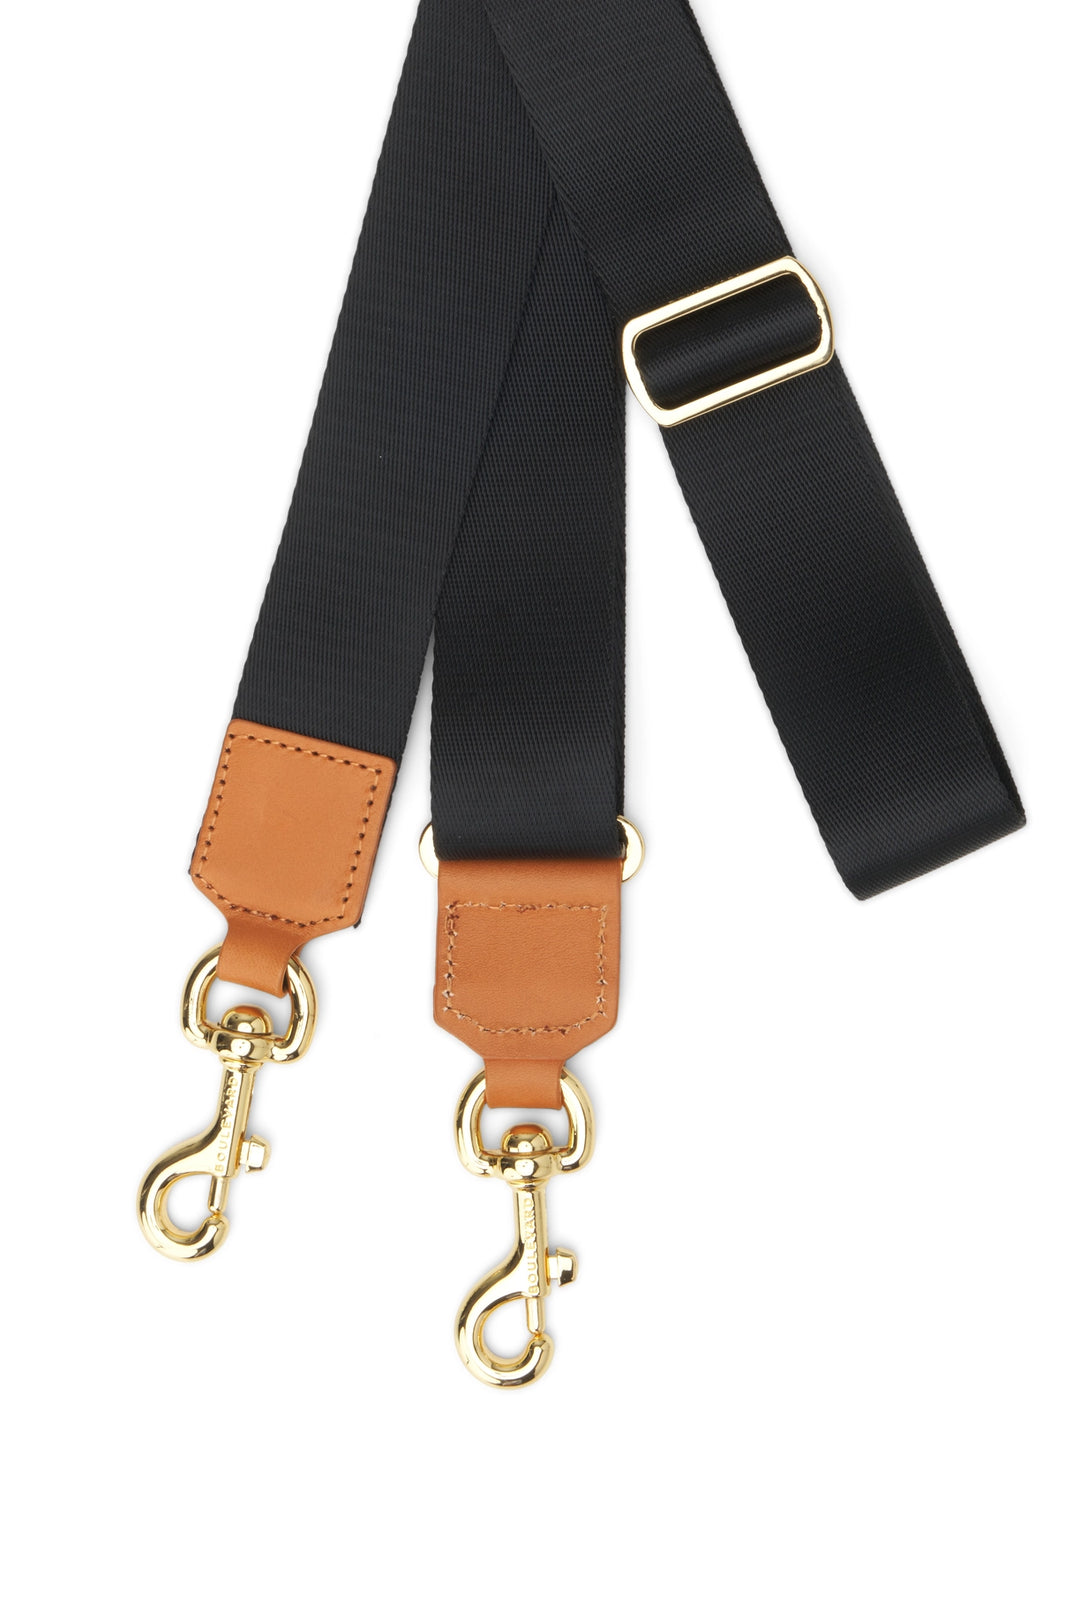 Kris - Black Strap with Leather Accents